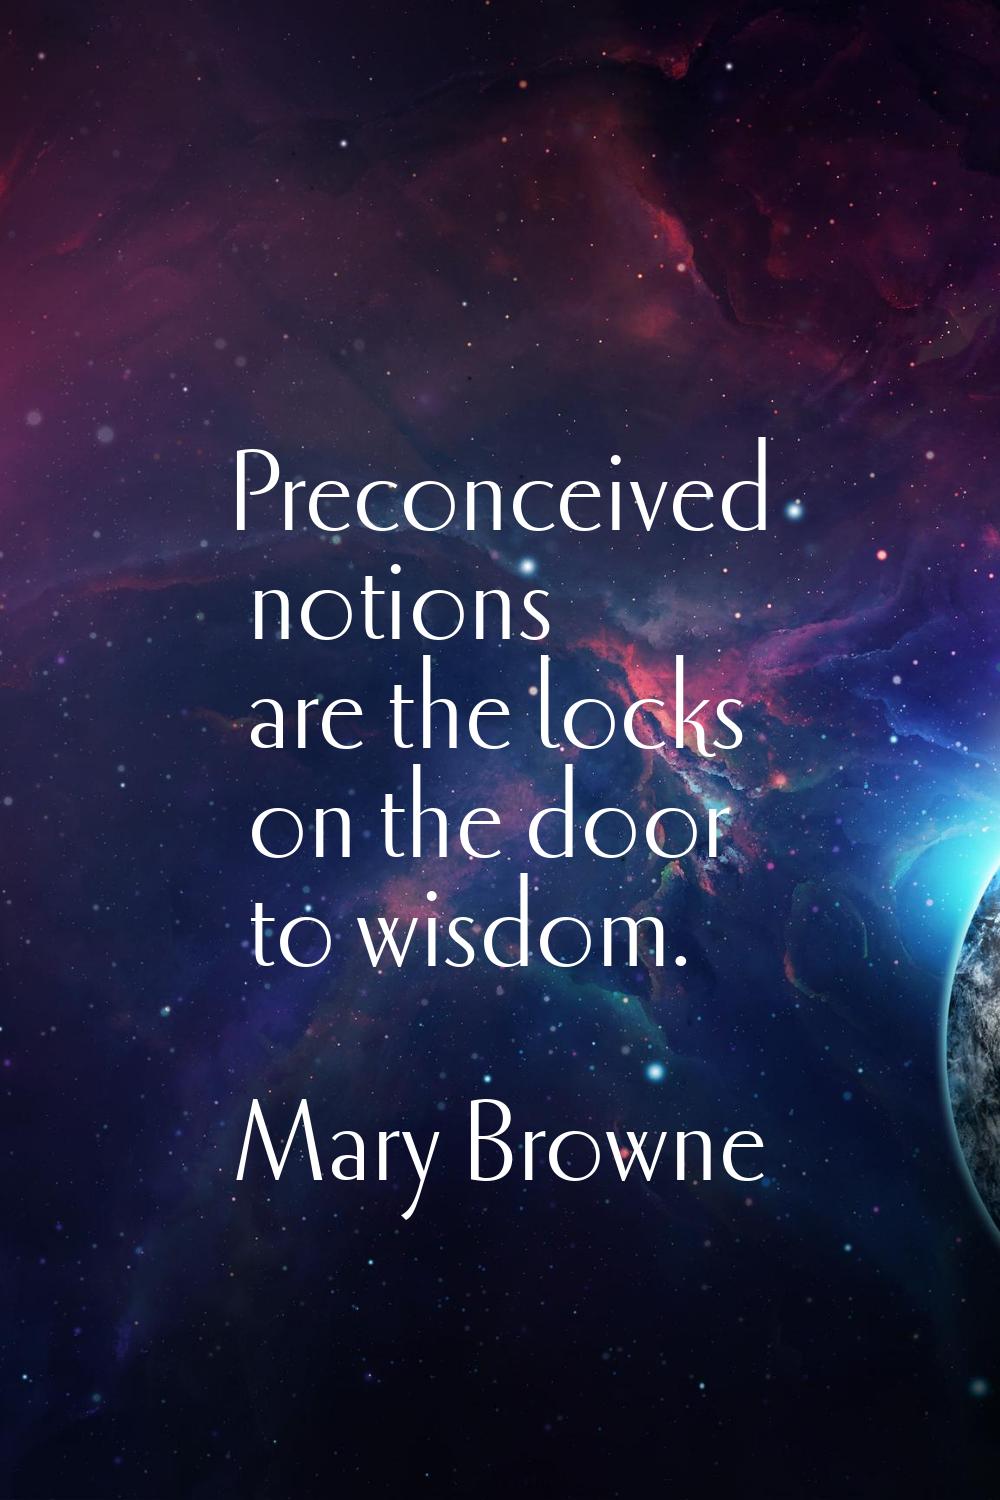 Preconceived notions are the locks on the door to wisdom.